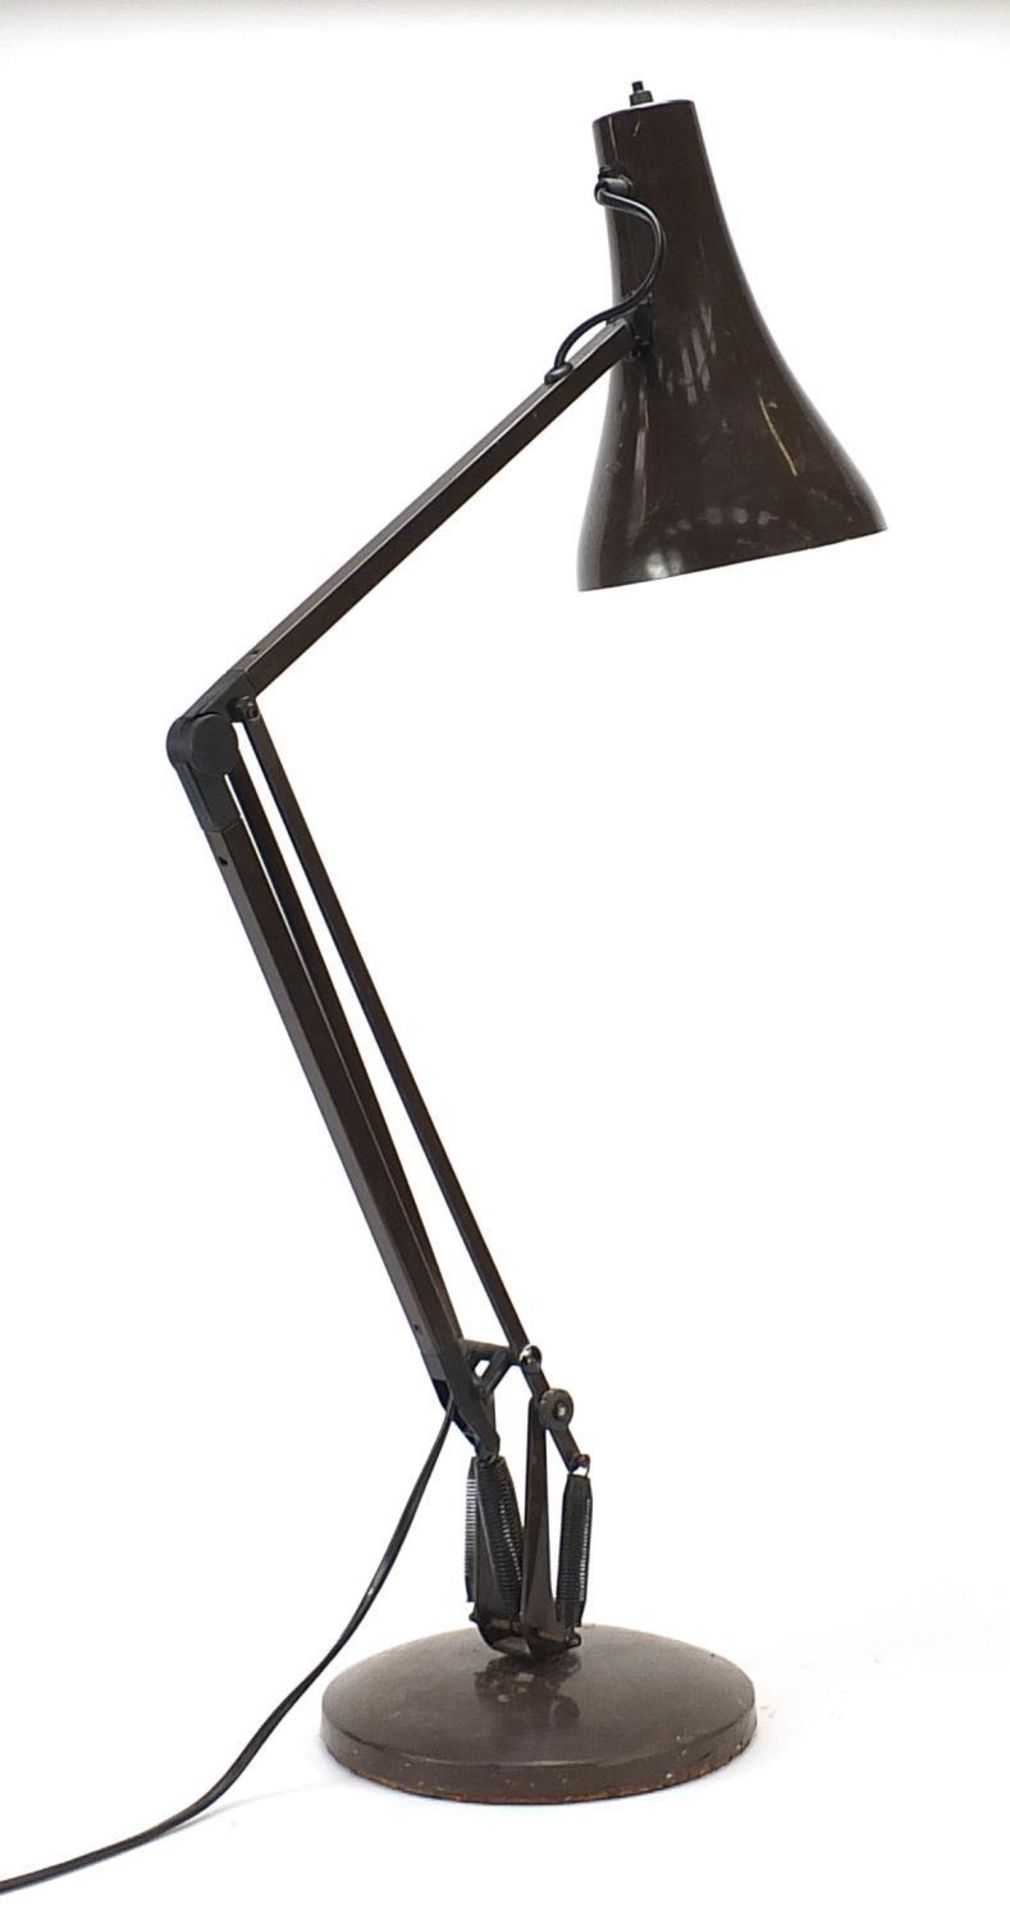 Vintage brown enamel anglepoise lamp, model 90 made in England : - Image 2 of 2